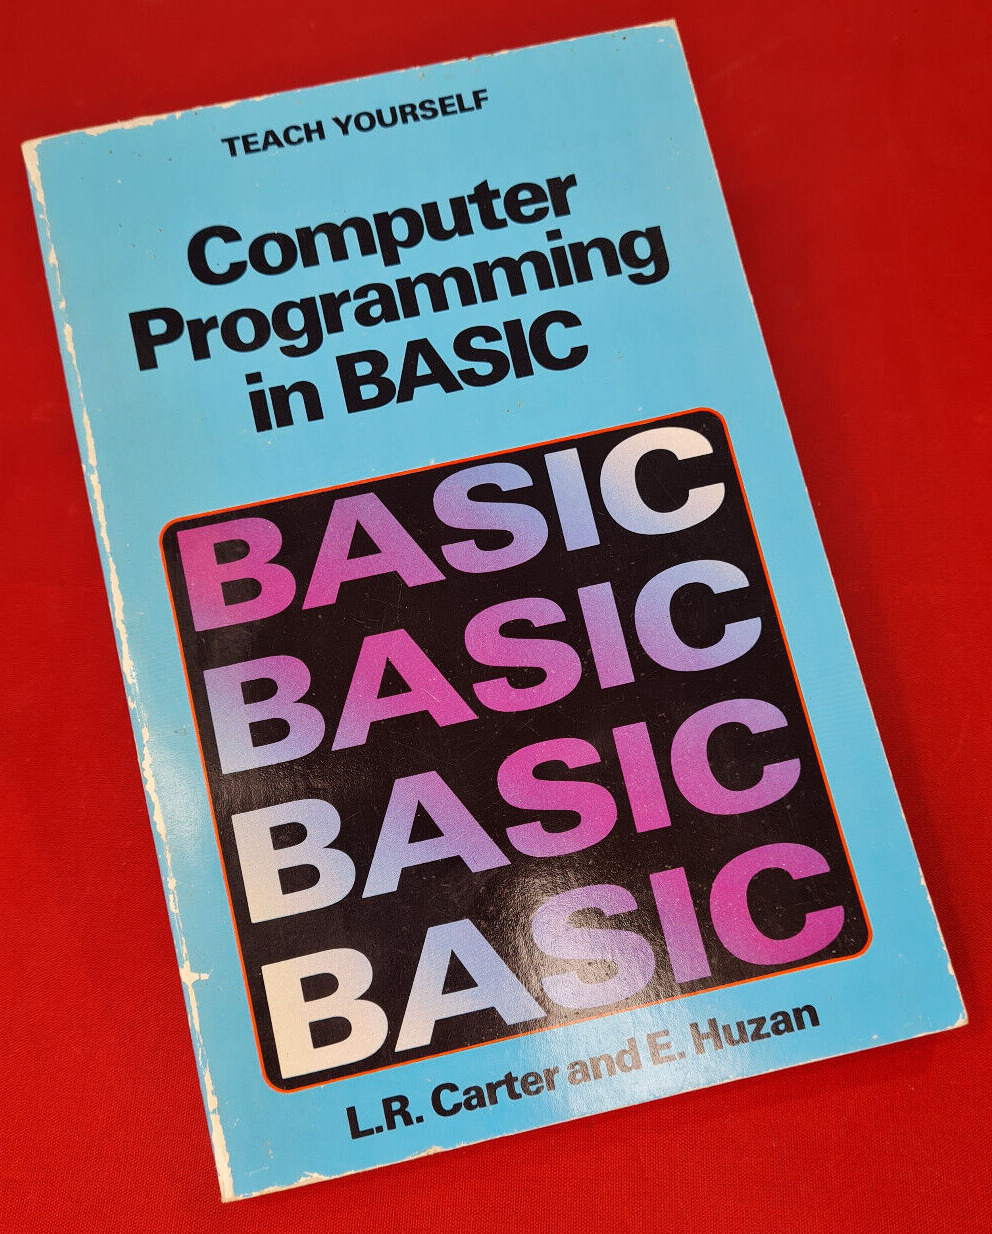 Teach yourself computer programming in BASIC Book 1984 by Carter & Huzan